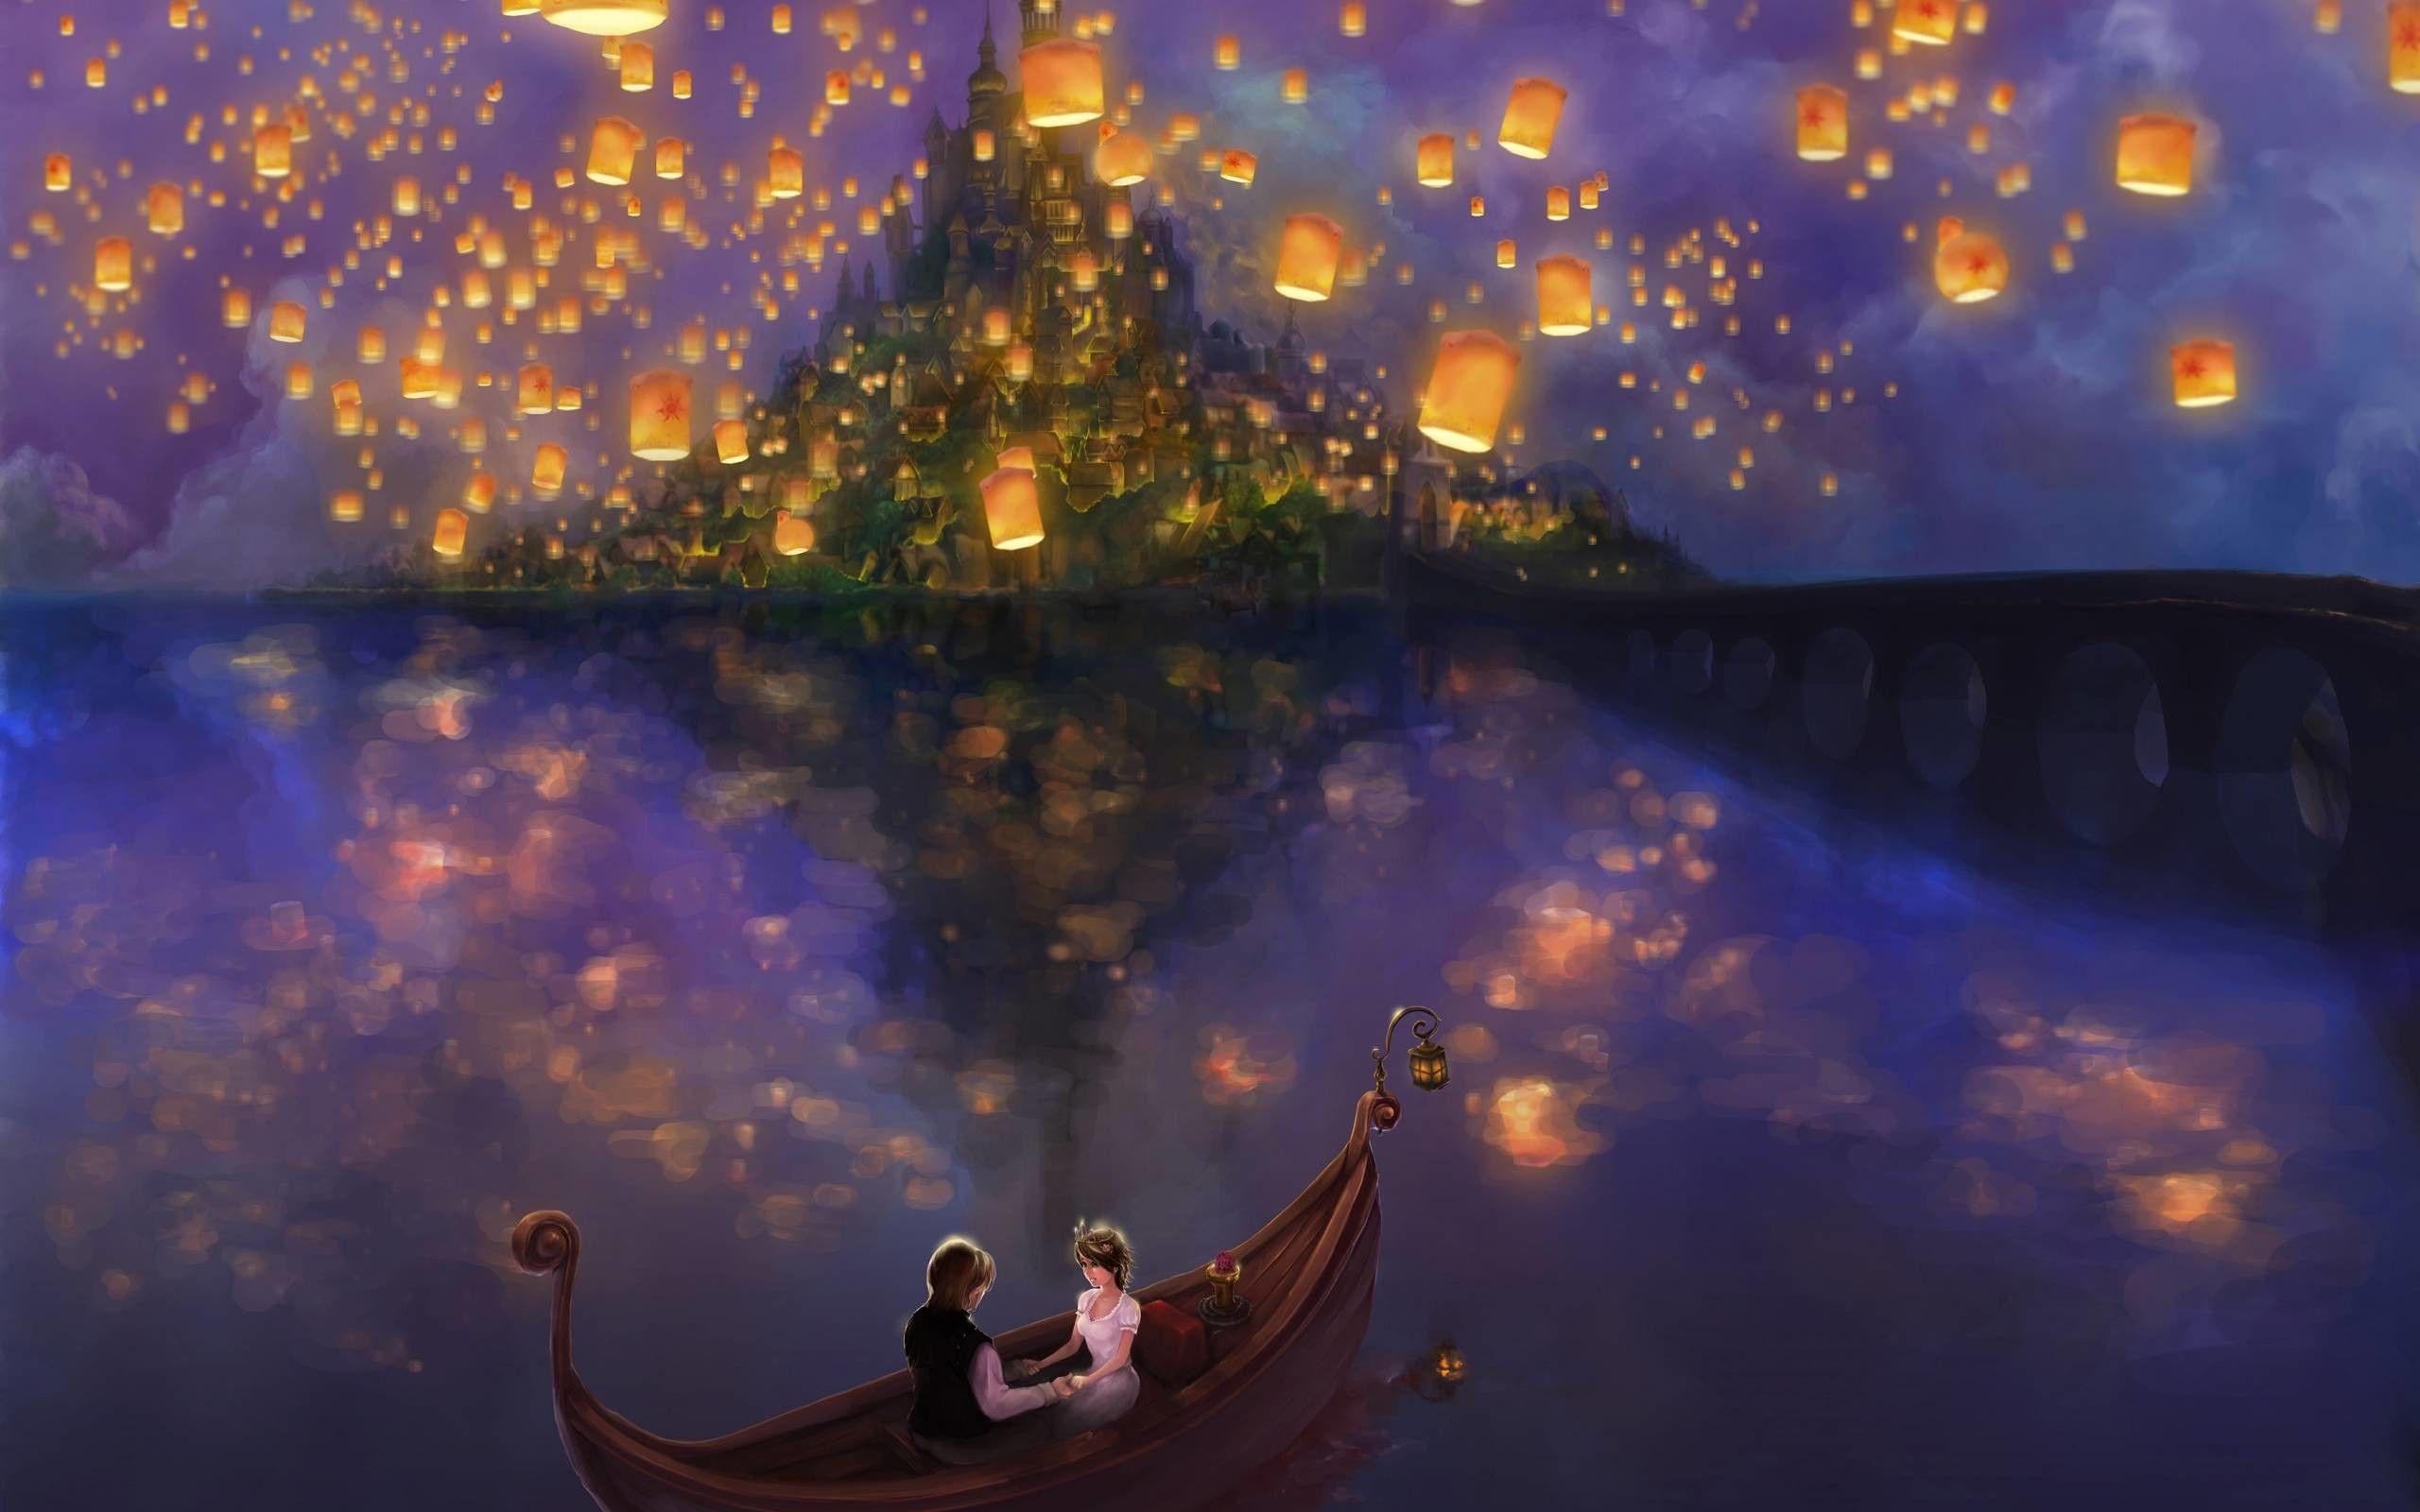 Tangled Wallpapers - Top Free Tangled Backgrounds - WallpaperAccess